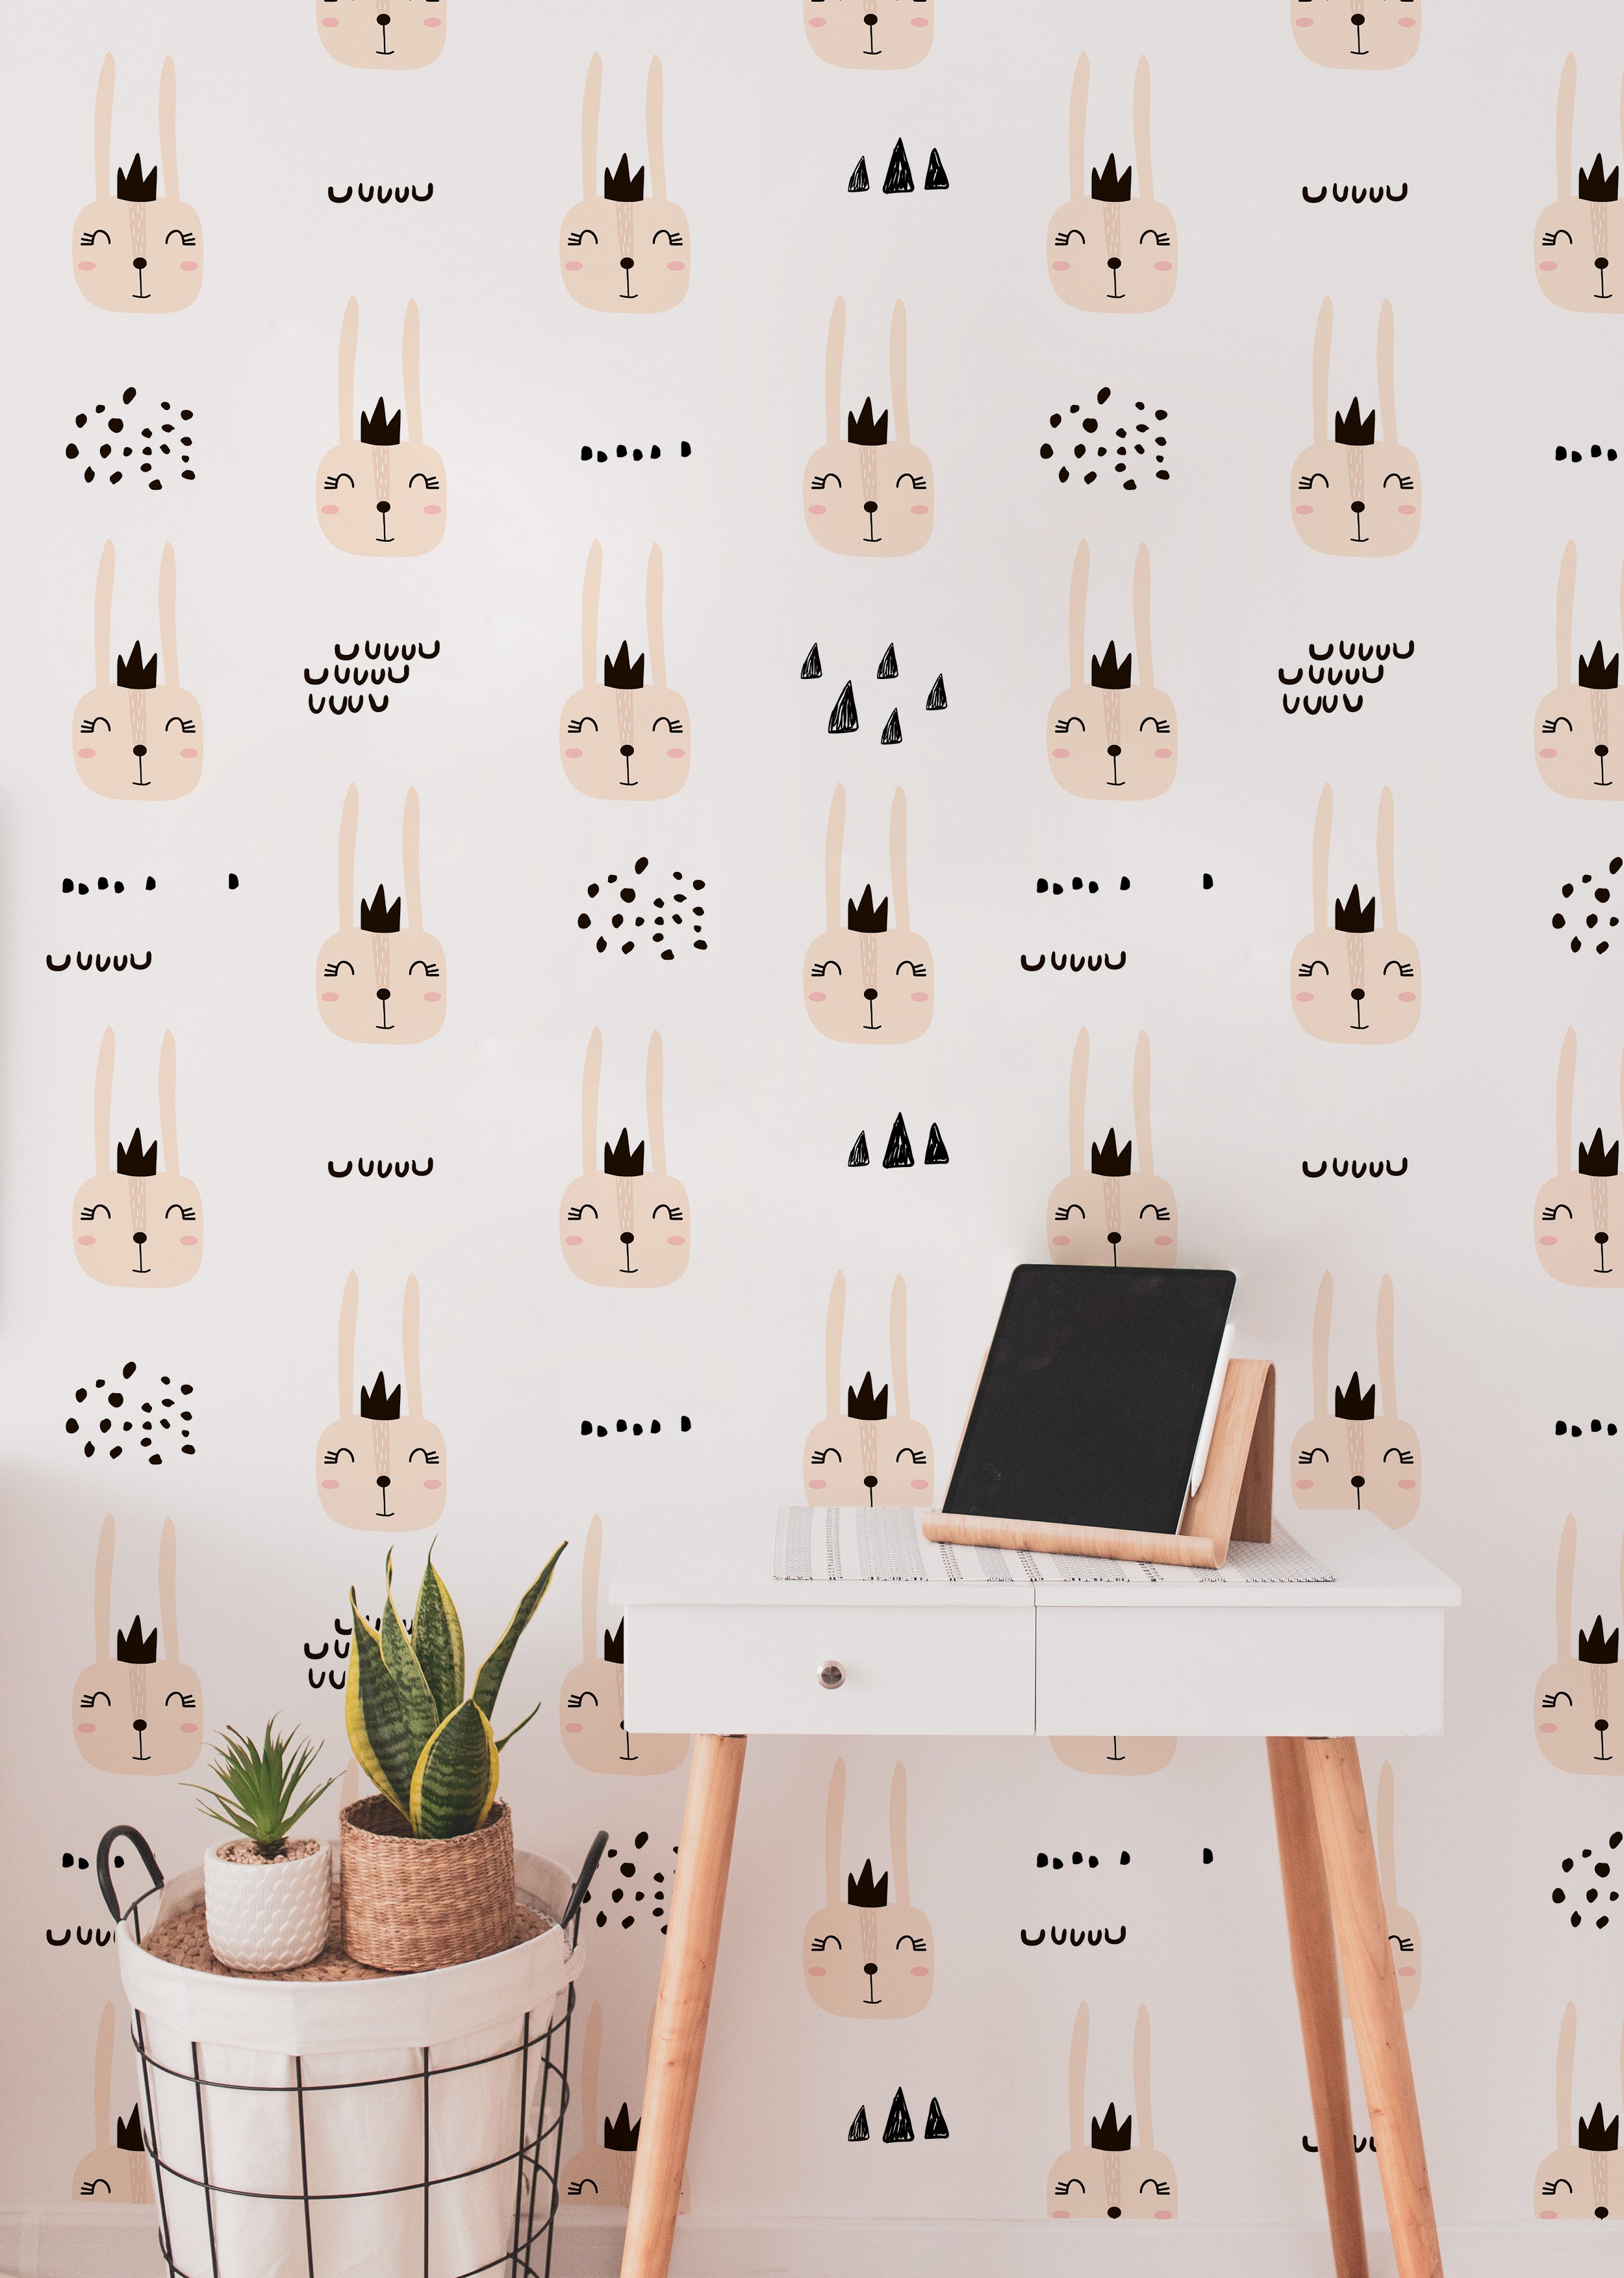 An interior setup displaying the Cute Bunnies Wallpaper in a home office space. The wallpaper, filled with endearing bunny faces and simple decorative motifs, covers the room, adding a charming and whimsical atmosphere suitable for creative or child-friendly spaces